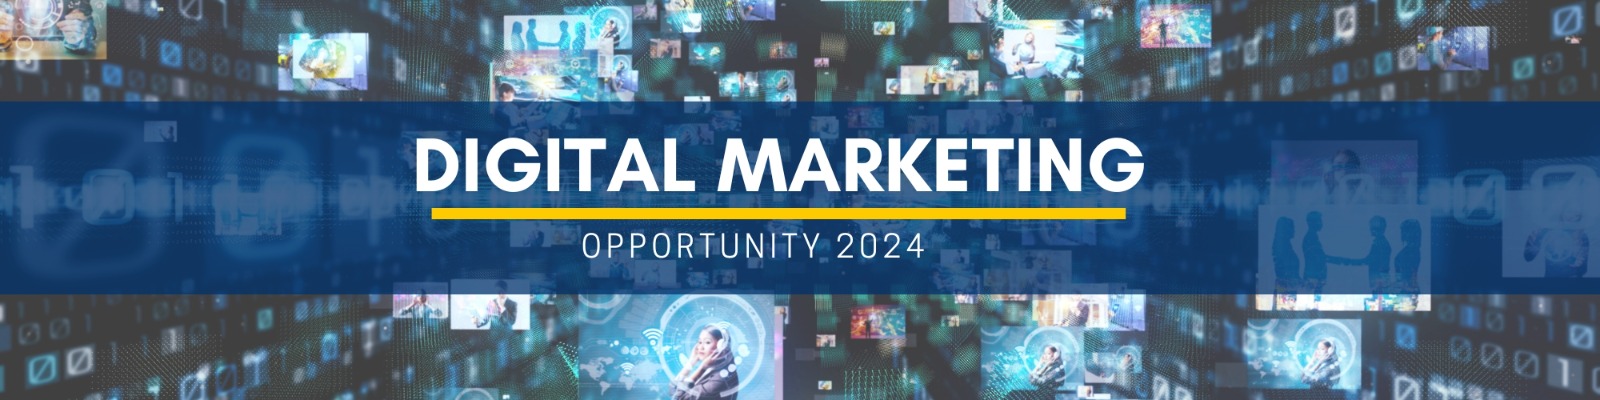 Unlocking Digital Marketing Opportunities in 2024: Your Ultimate Career Guide